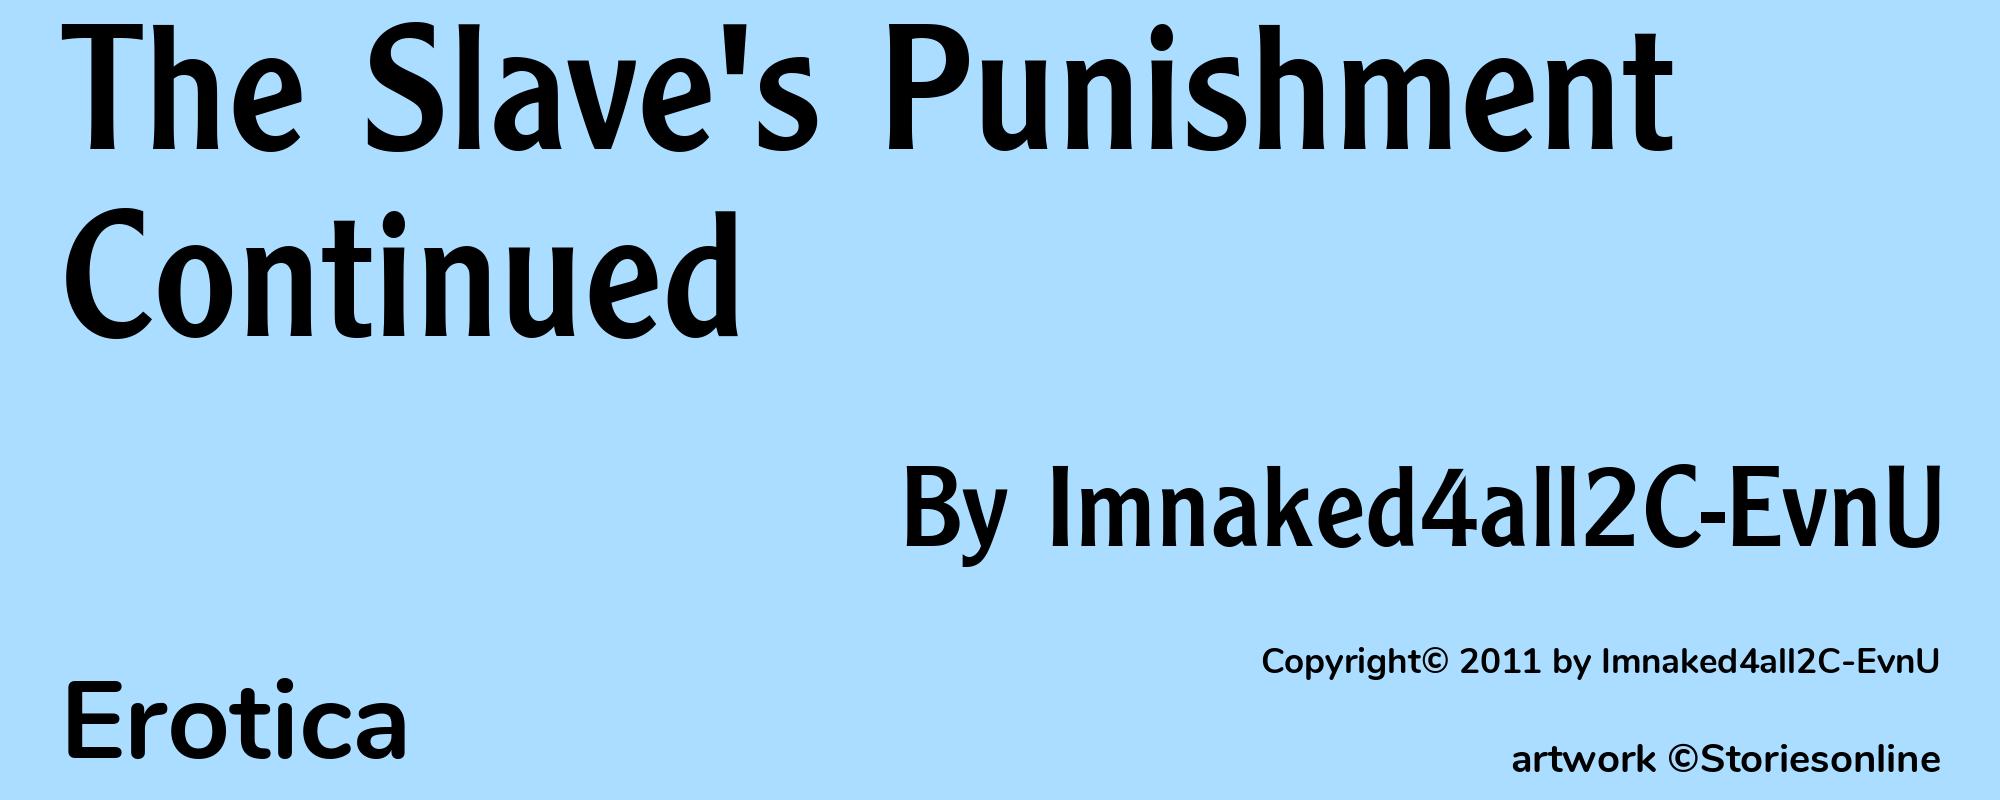 The Slave's Punishment Continued - Cover